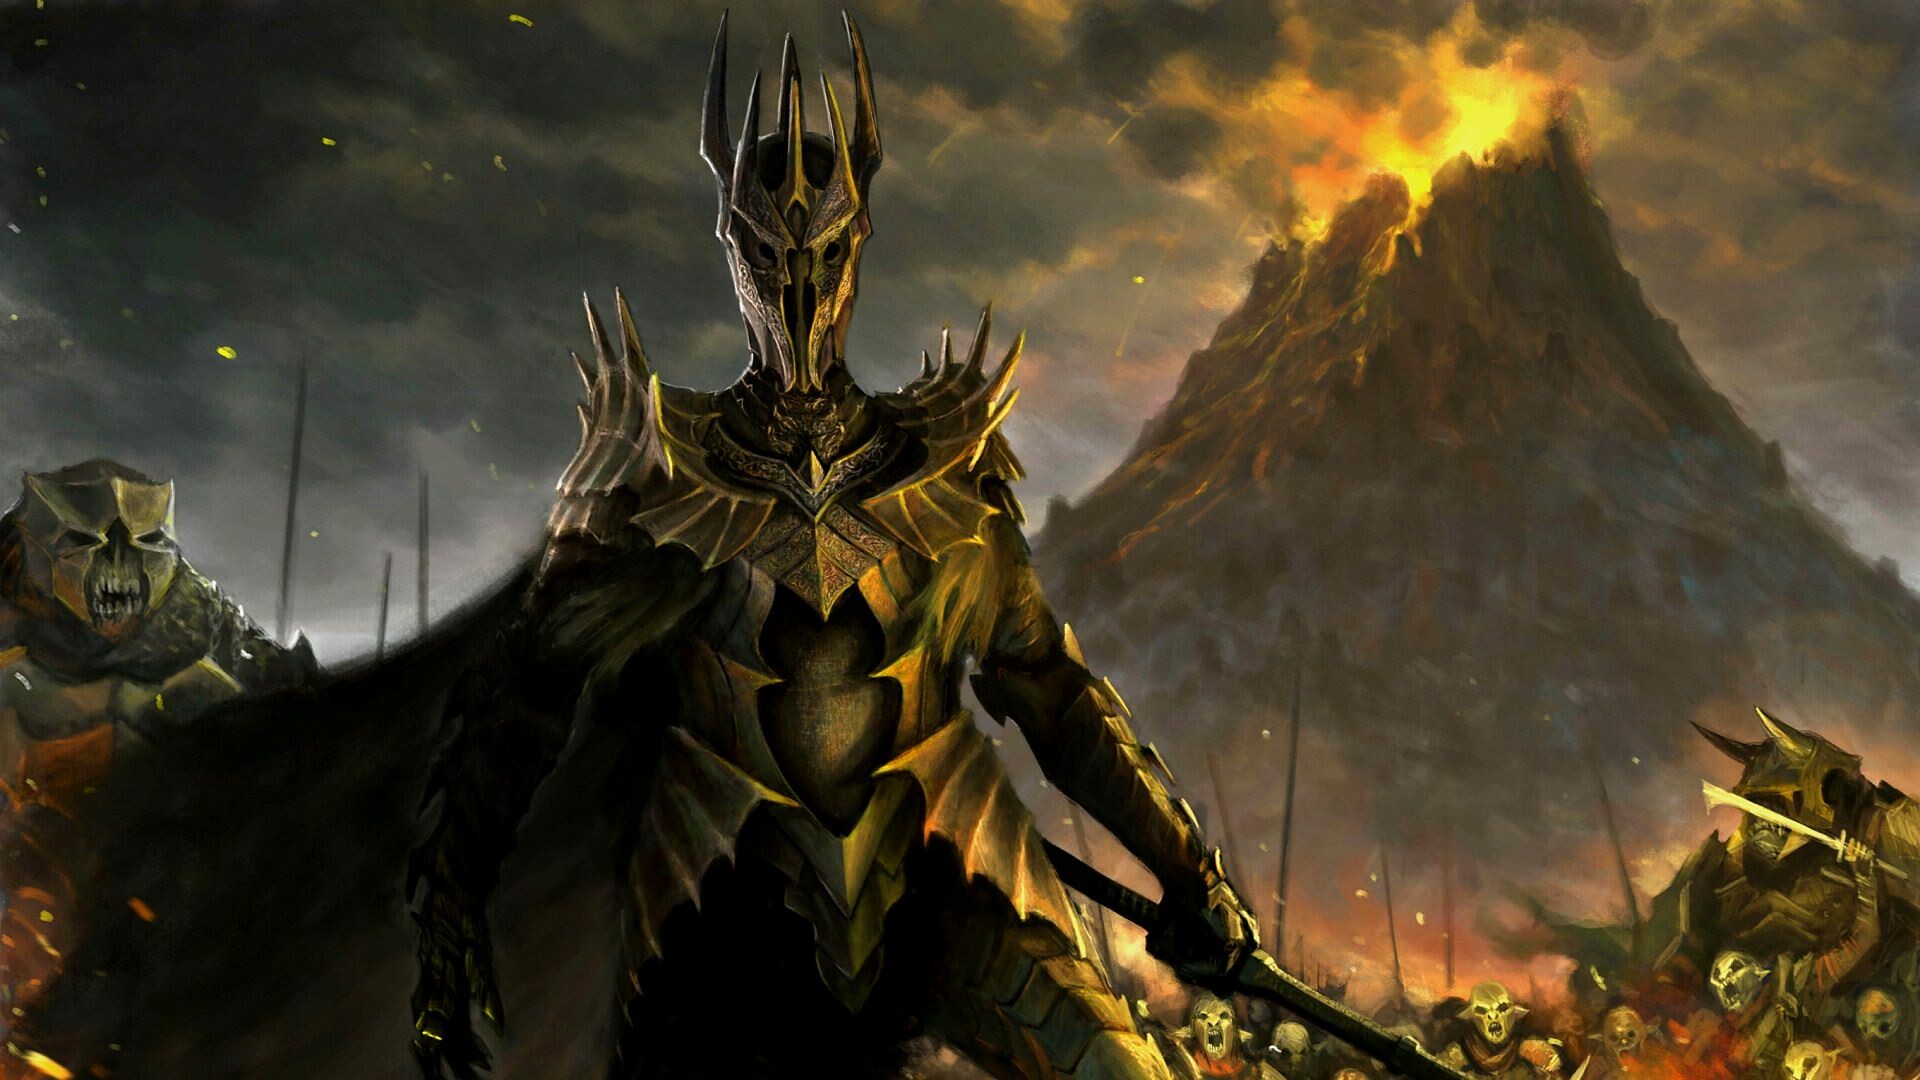 The Lord of the Rings: Sauron, Identified as the "Necromancer" of Tolkien's earlier novel The Hobbit. 1920x1080 Full HD Wallpaper.